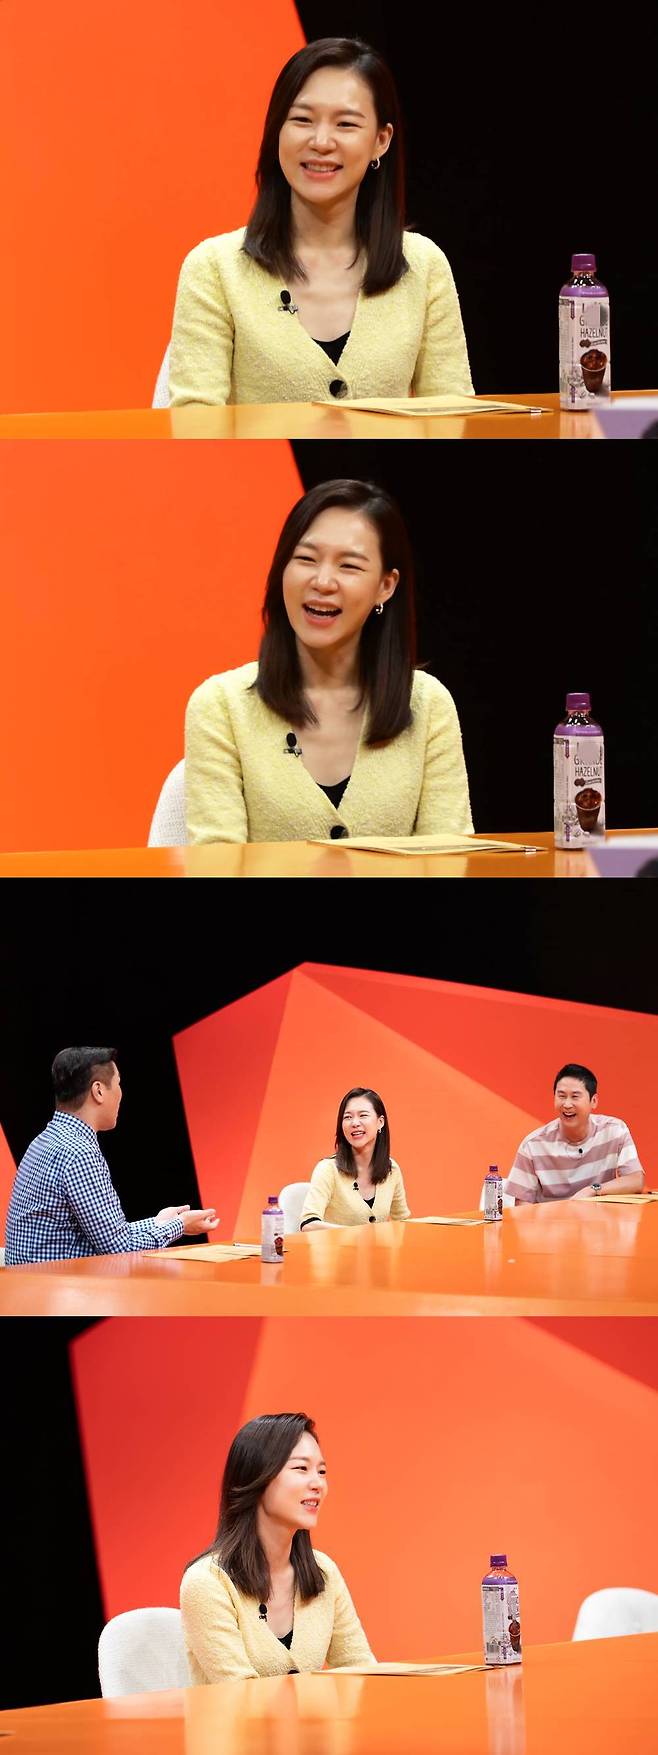 Yeri Han showed woman Seo Jang-hoon aspect.Actor Yeri Han, who has been possessed all over the world for his maternal acting in the movie Minari, will appear on SBS My Little Old Boy broadcast on September 19th.In a recent recording, Yeri Han said, What happened in my life has happened.Shin Dong-yeop, Seo Jang-hoon, who heard this, called everyone when his parents called to say that he was proud of his surroundings.Unlike the expectation, Yeri Han said, It is just.Yeri Han also boasted of his extraordinary friendship, saying, I have never fought with my two sisters. He cited cleaning style as the only one that did not fit.He laughed, revealing (?) that he was not cleaning up but cleaning himself.Yeri Han said, Even if it is not dizzy, the dust keeps cleaning. She showed a clean aspect like Woman Seo Jang-hoon and got the storm sympathy of Seo Jang-hoon.